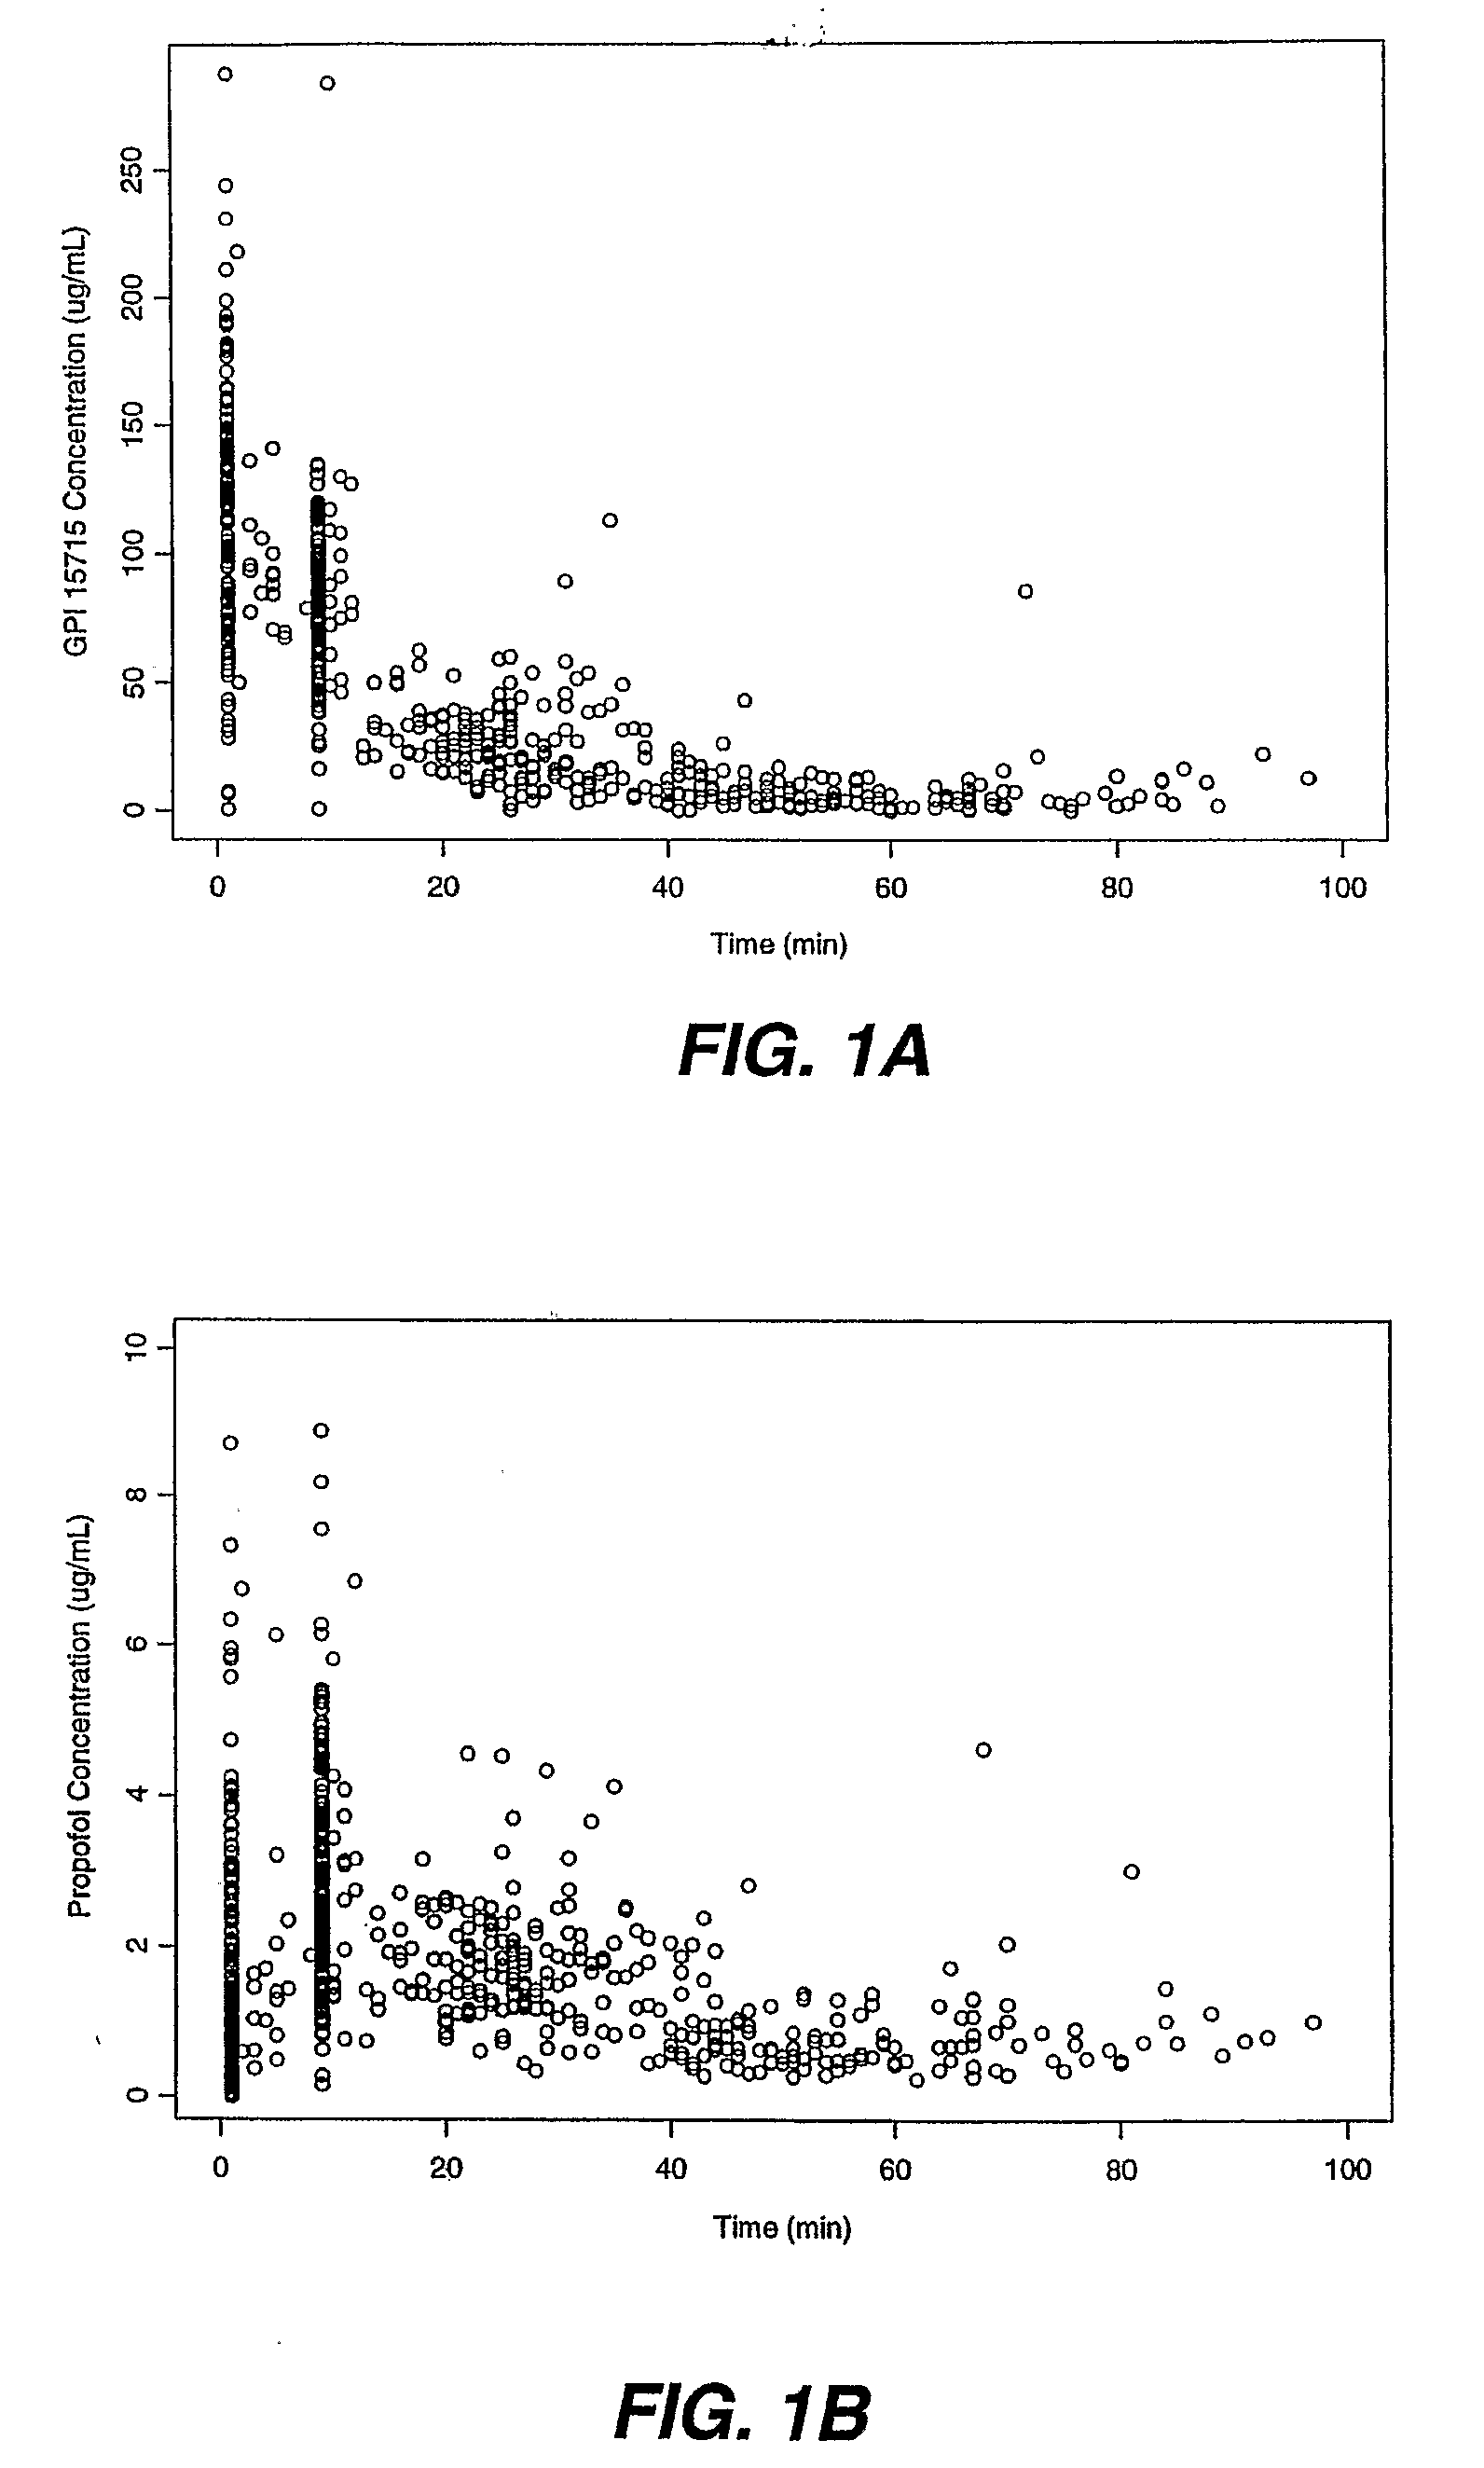 Methods Of Dosing Propofol Prodrugs For Inducing Mild To Moderate Levels Of Sedation